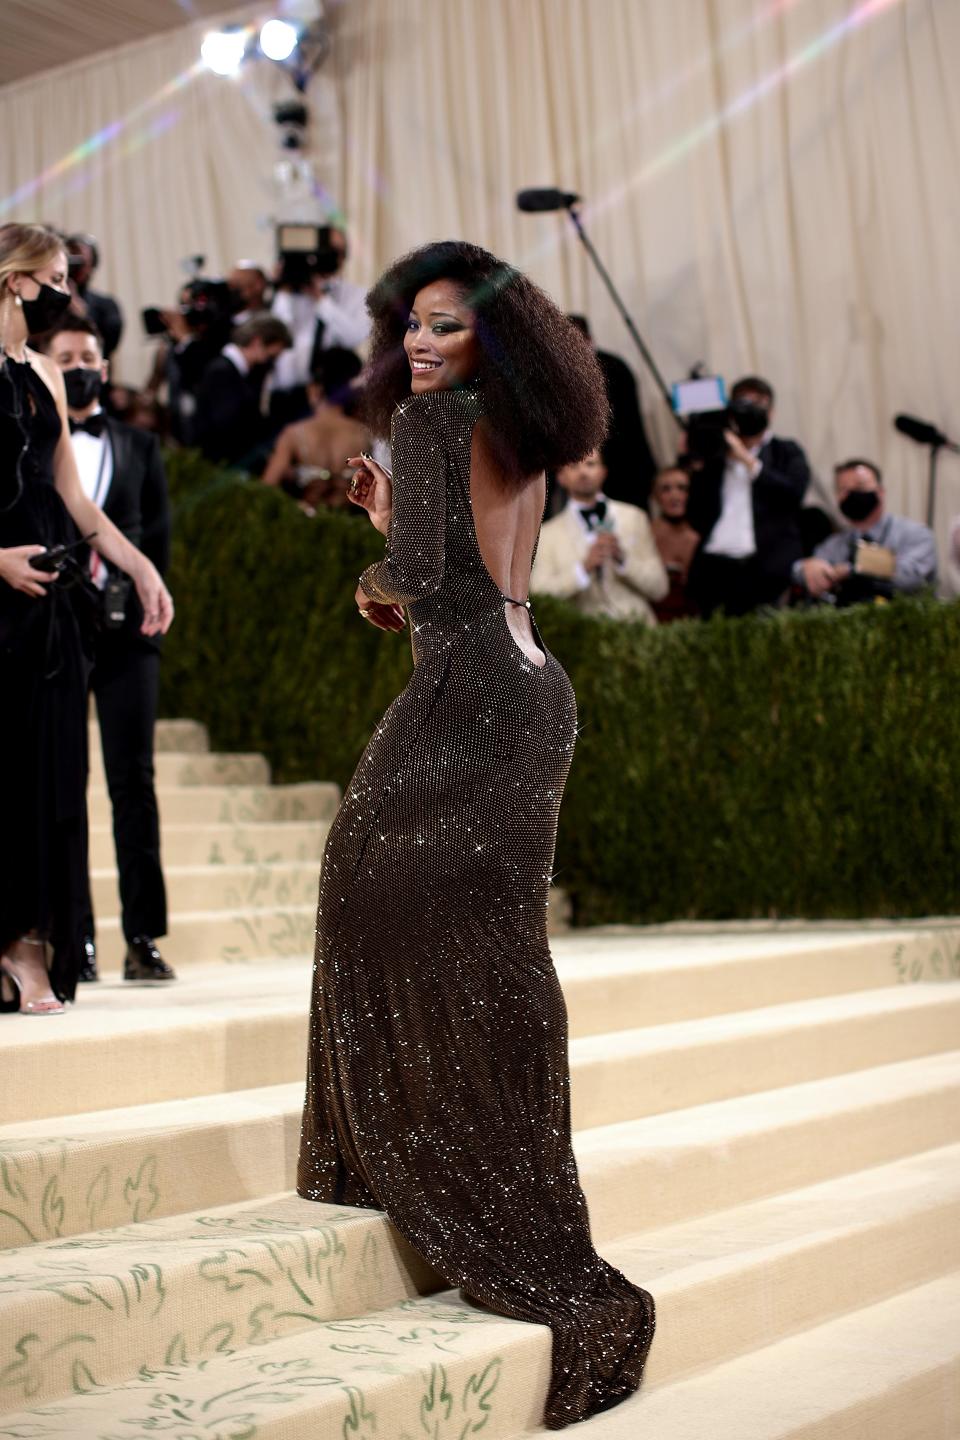 Keke Palmer, who was one of the hosts for the 2021 Met Gala, kept audiences engaged with commentary.